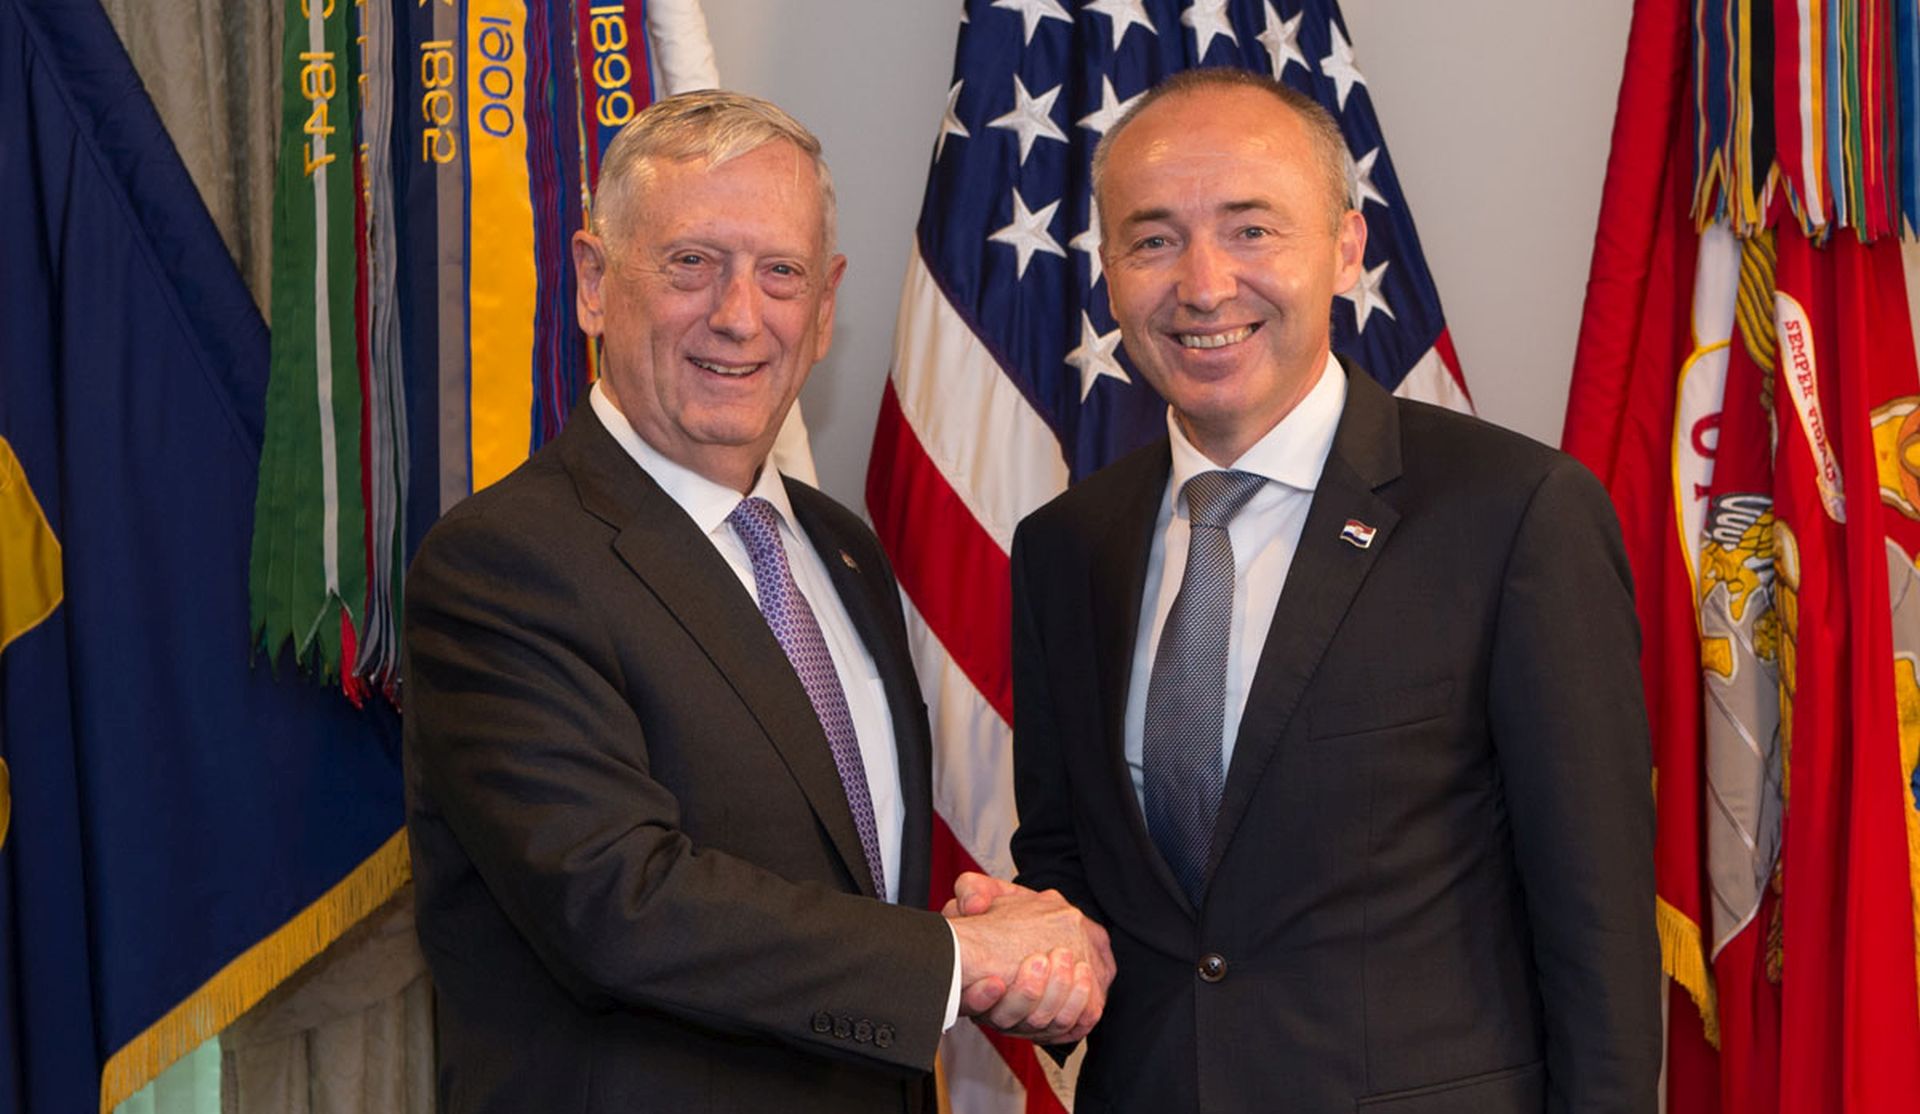 Defense Secretary Jim Mattis stands for a photo with Croatia’s Minister of Defence Damir Krstičević before a meeting at the Pentagon in Washington, D.C., July 12, 2017. (DOD photo by U.S. Army Sgt. Amber I. Smith)